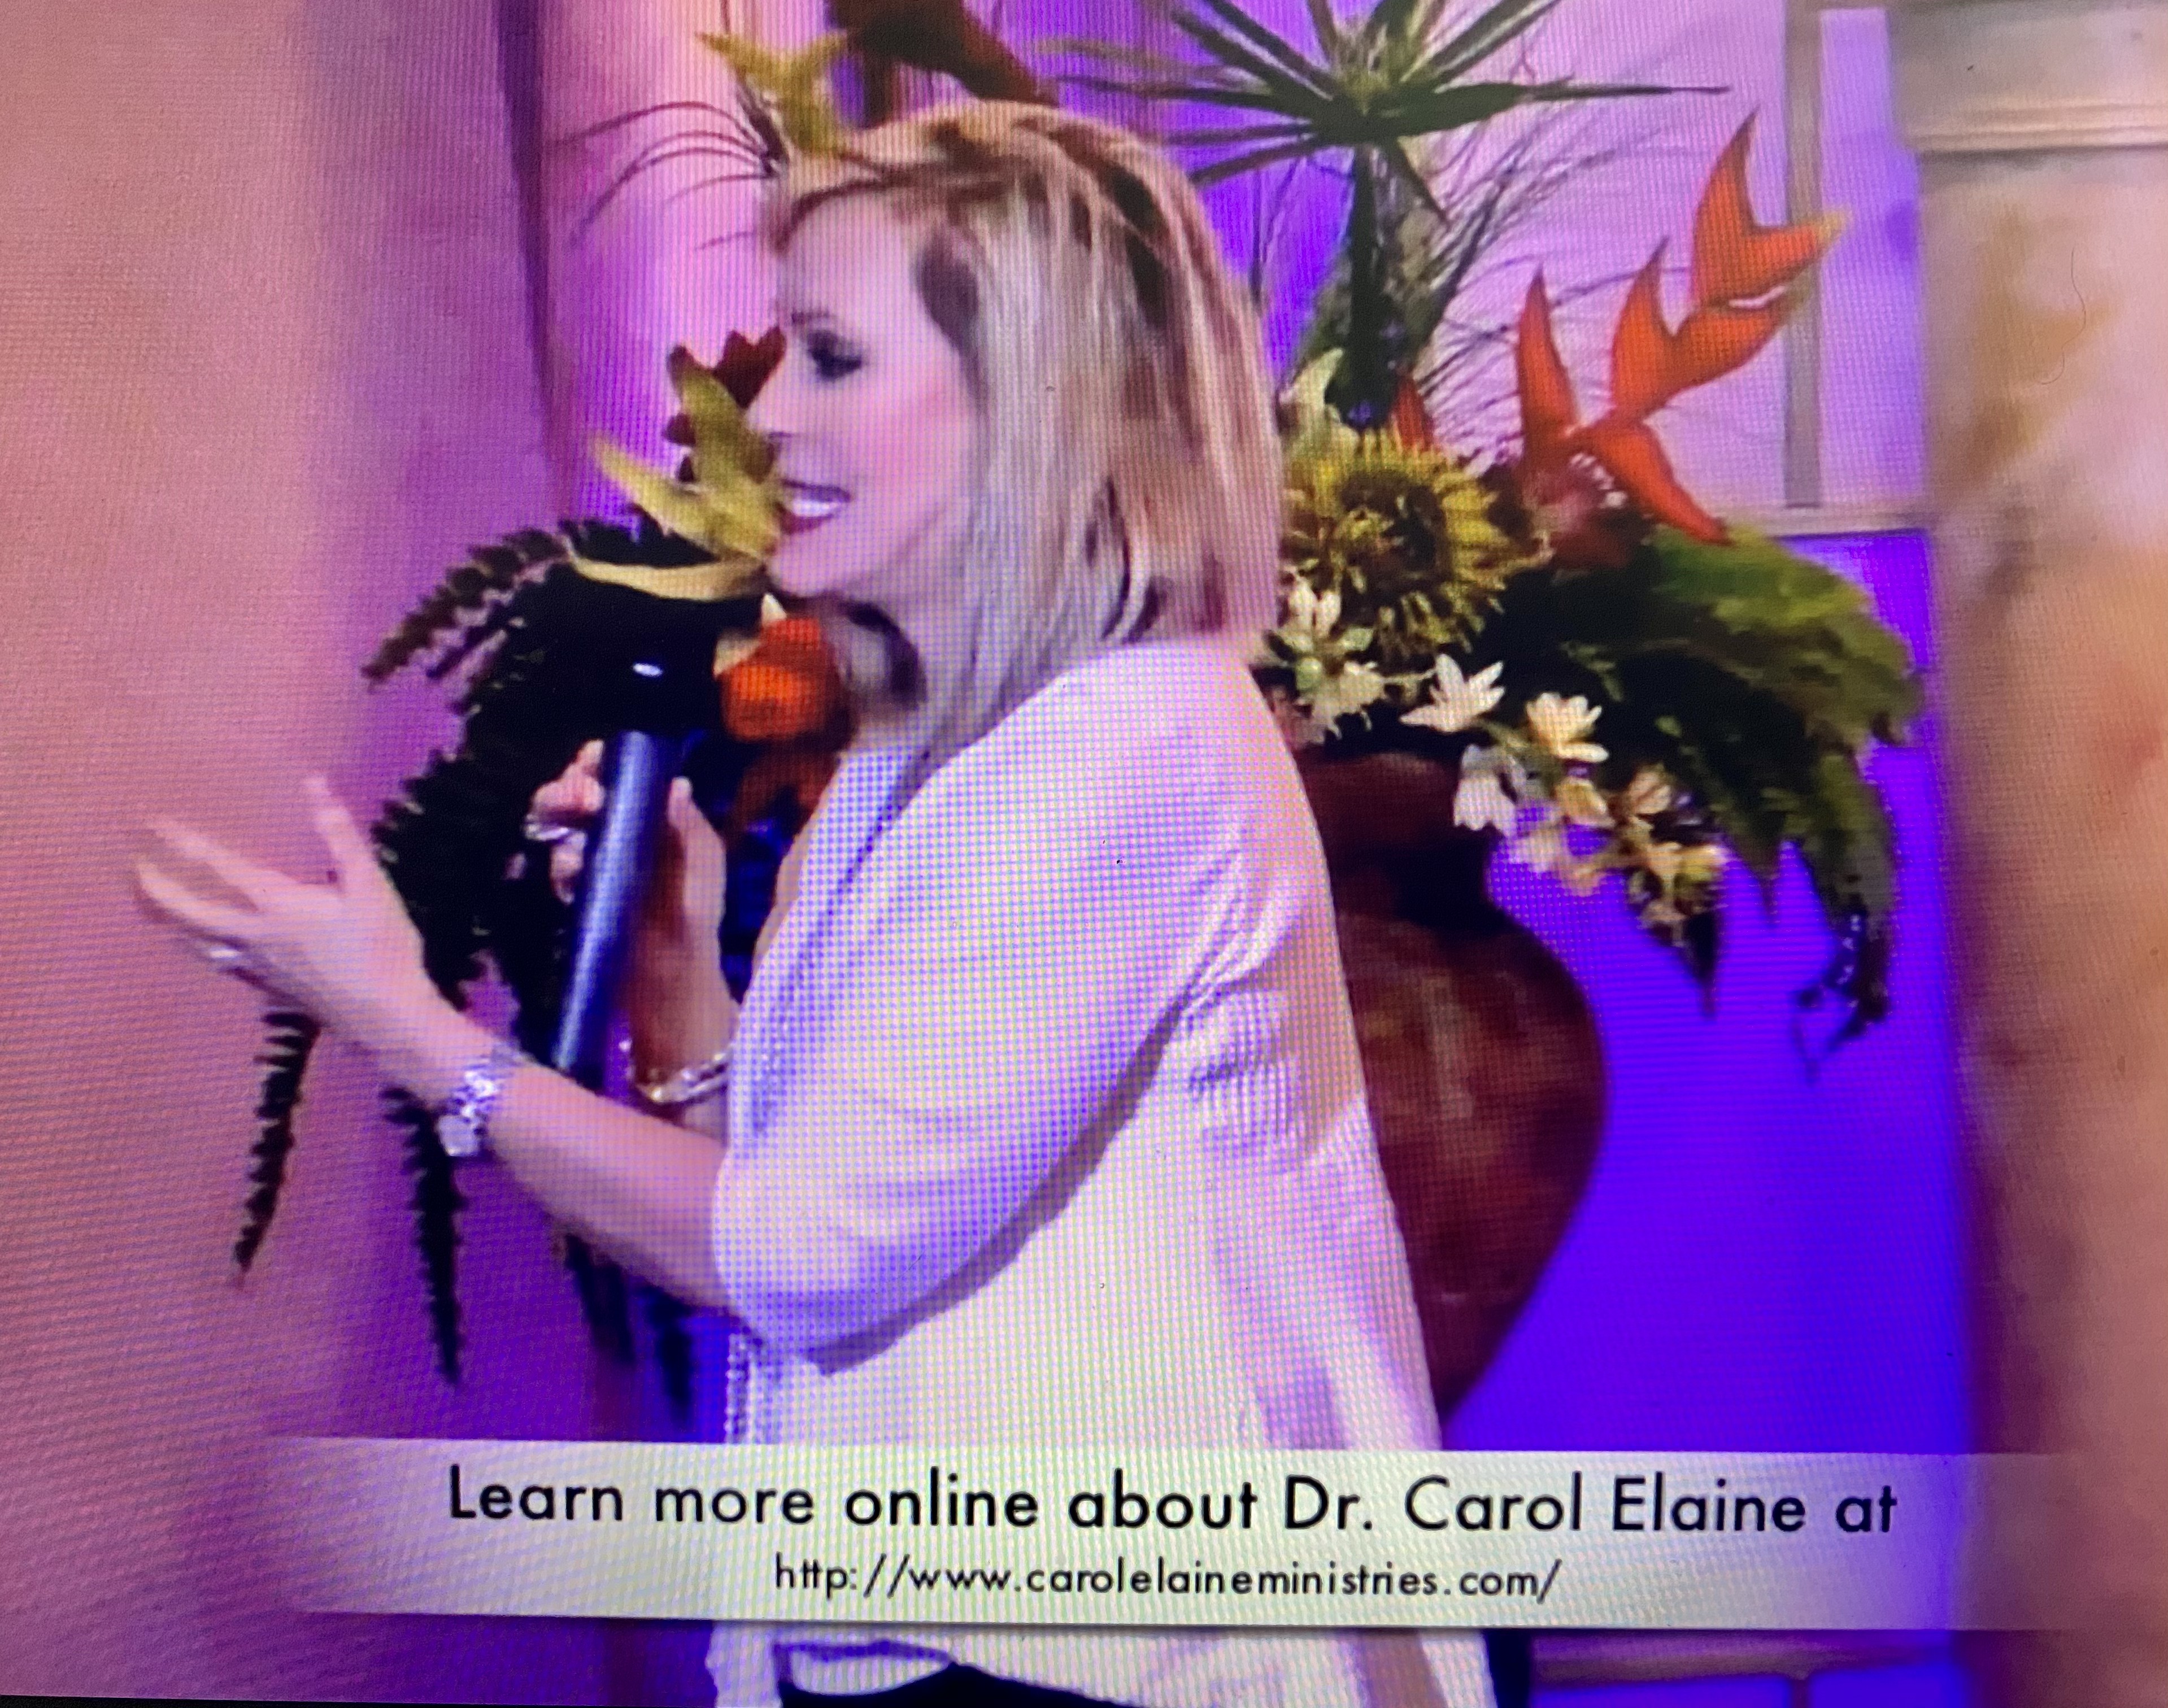 Prophetic Word by Dr. Carol Elaine in 2017 to Pastor Patrick at MCM